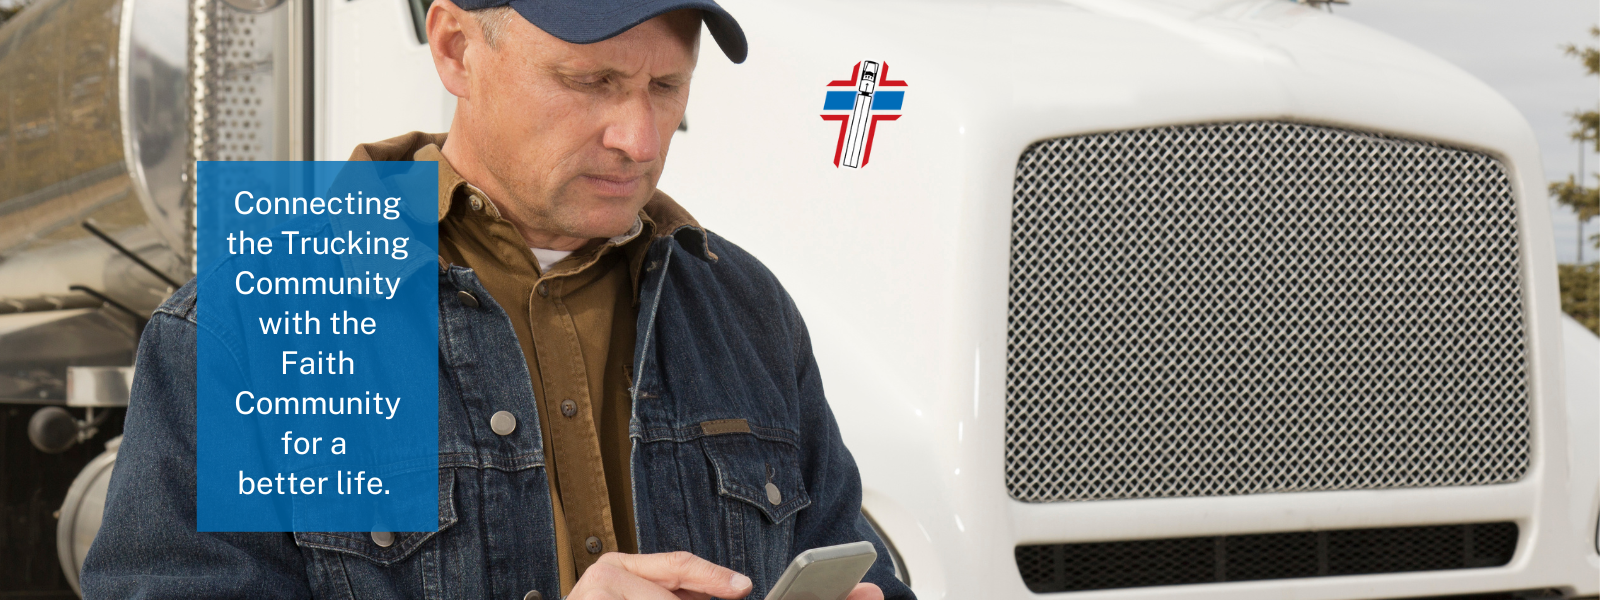 Connecting the trucking community with the faith community for a better life